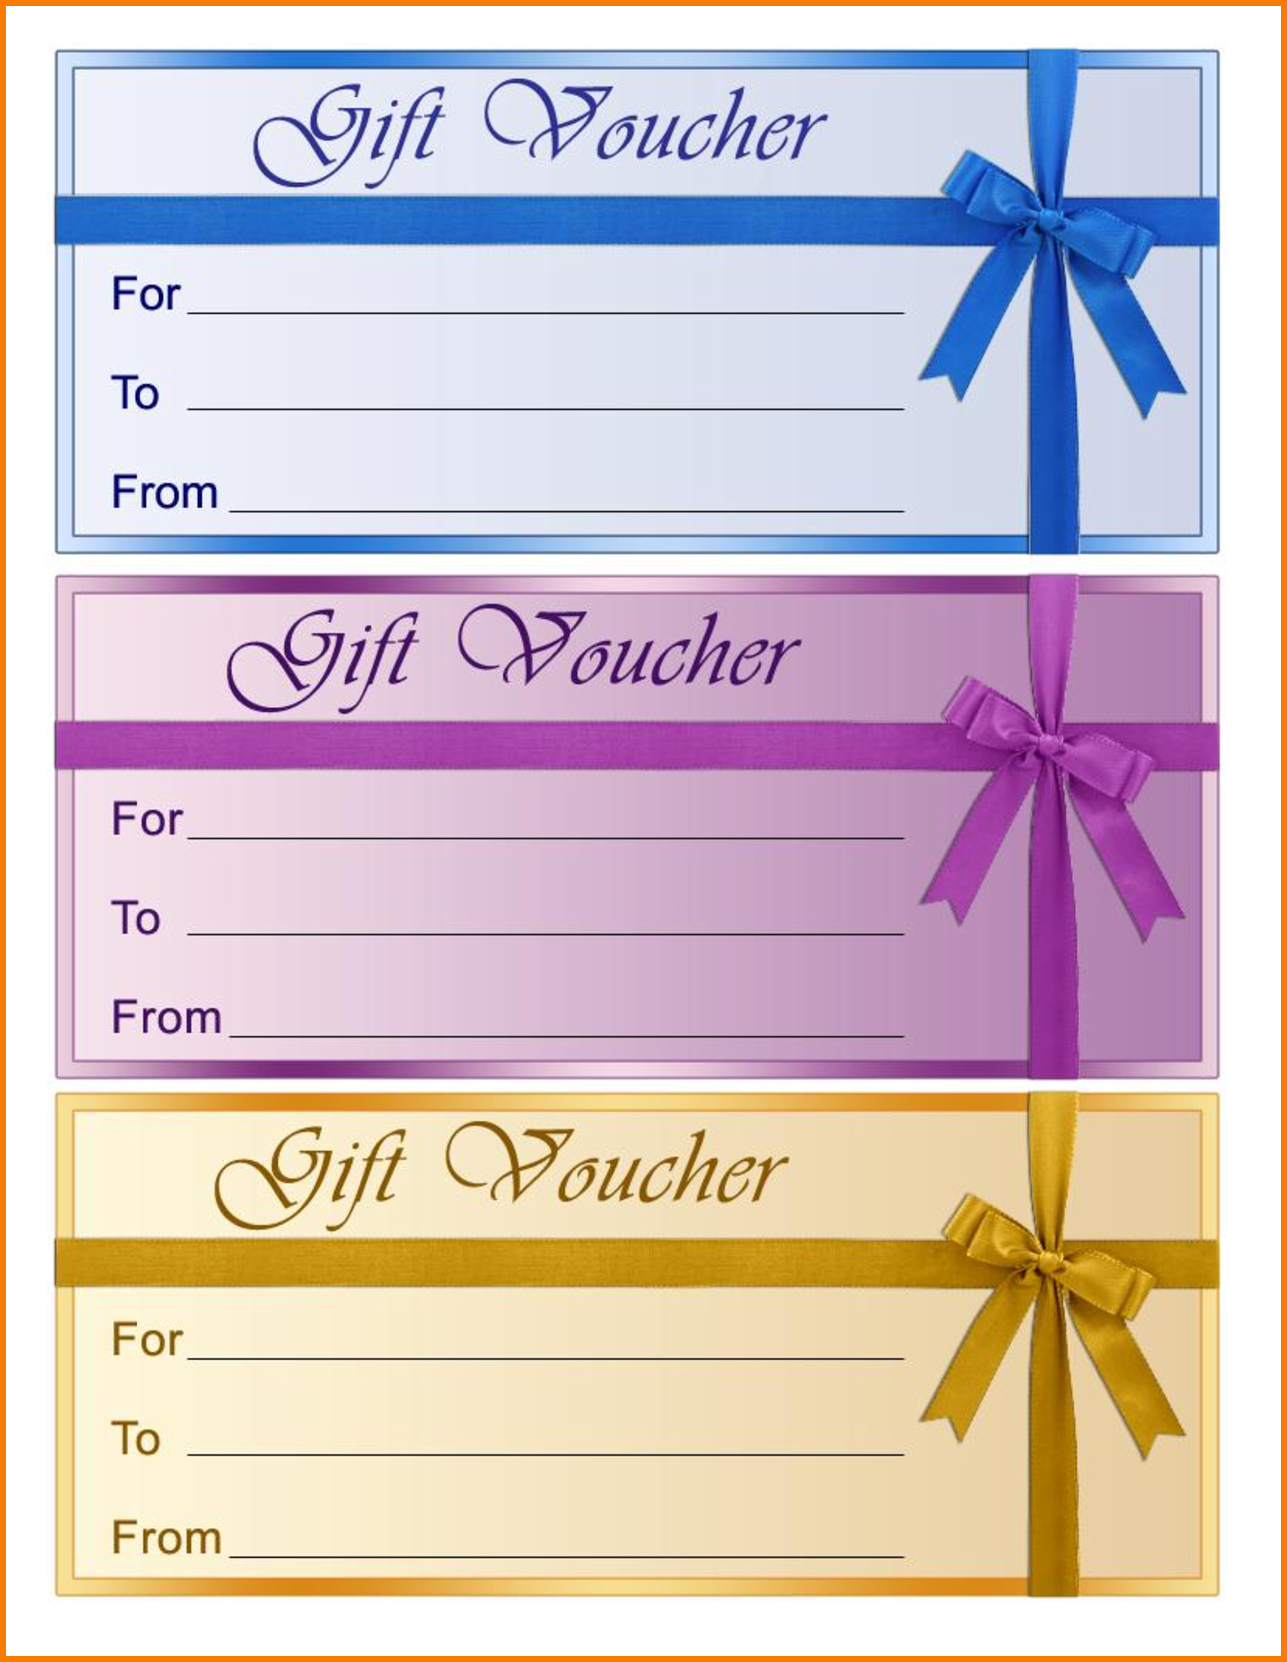 Free Printable Gift Certificates Indesign Certificate With Indesign Gift Certificate Template